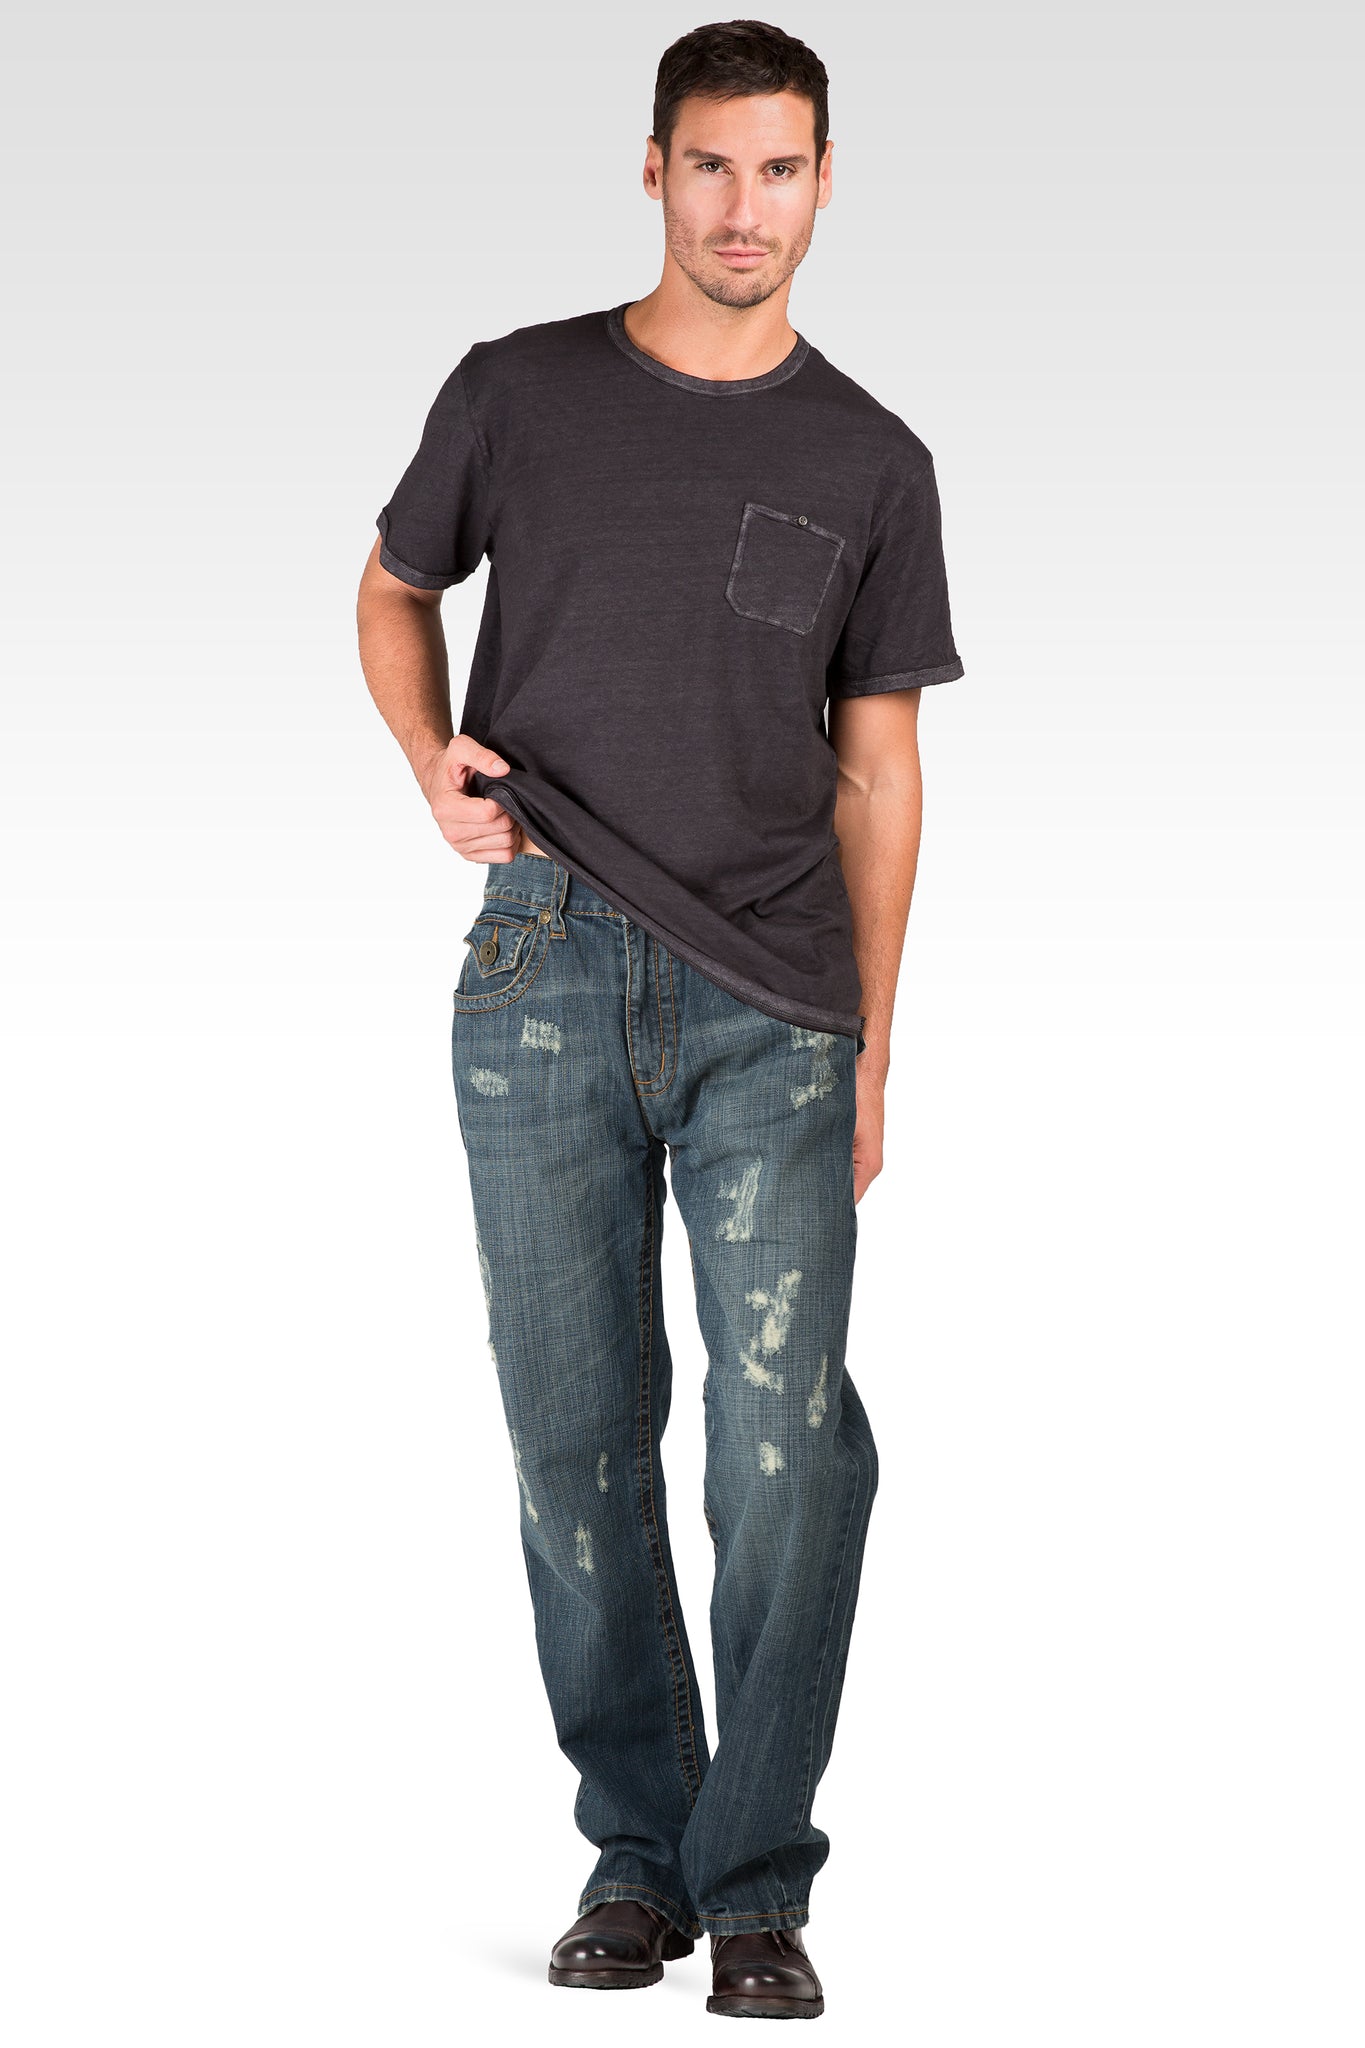 Midrise Relaxed Vintage Bootcut Distressed Premium 5 Pocket Jeans